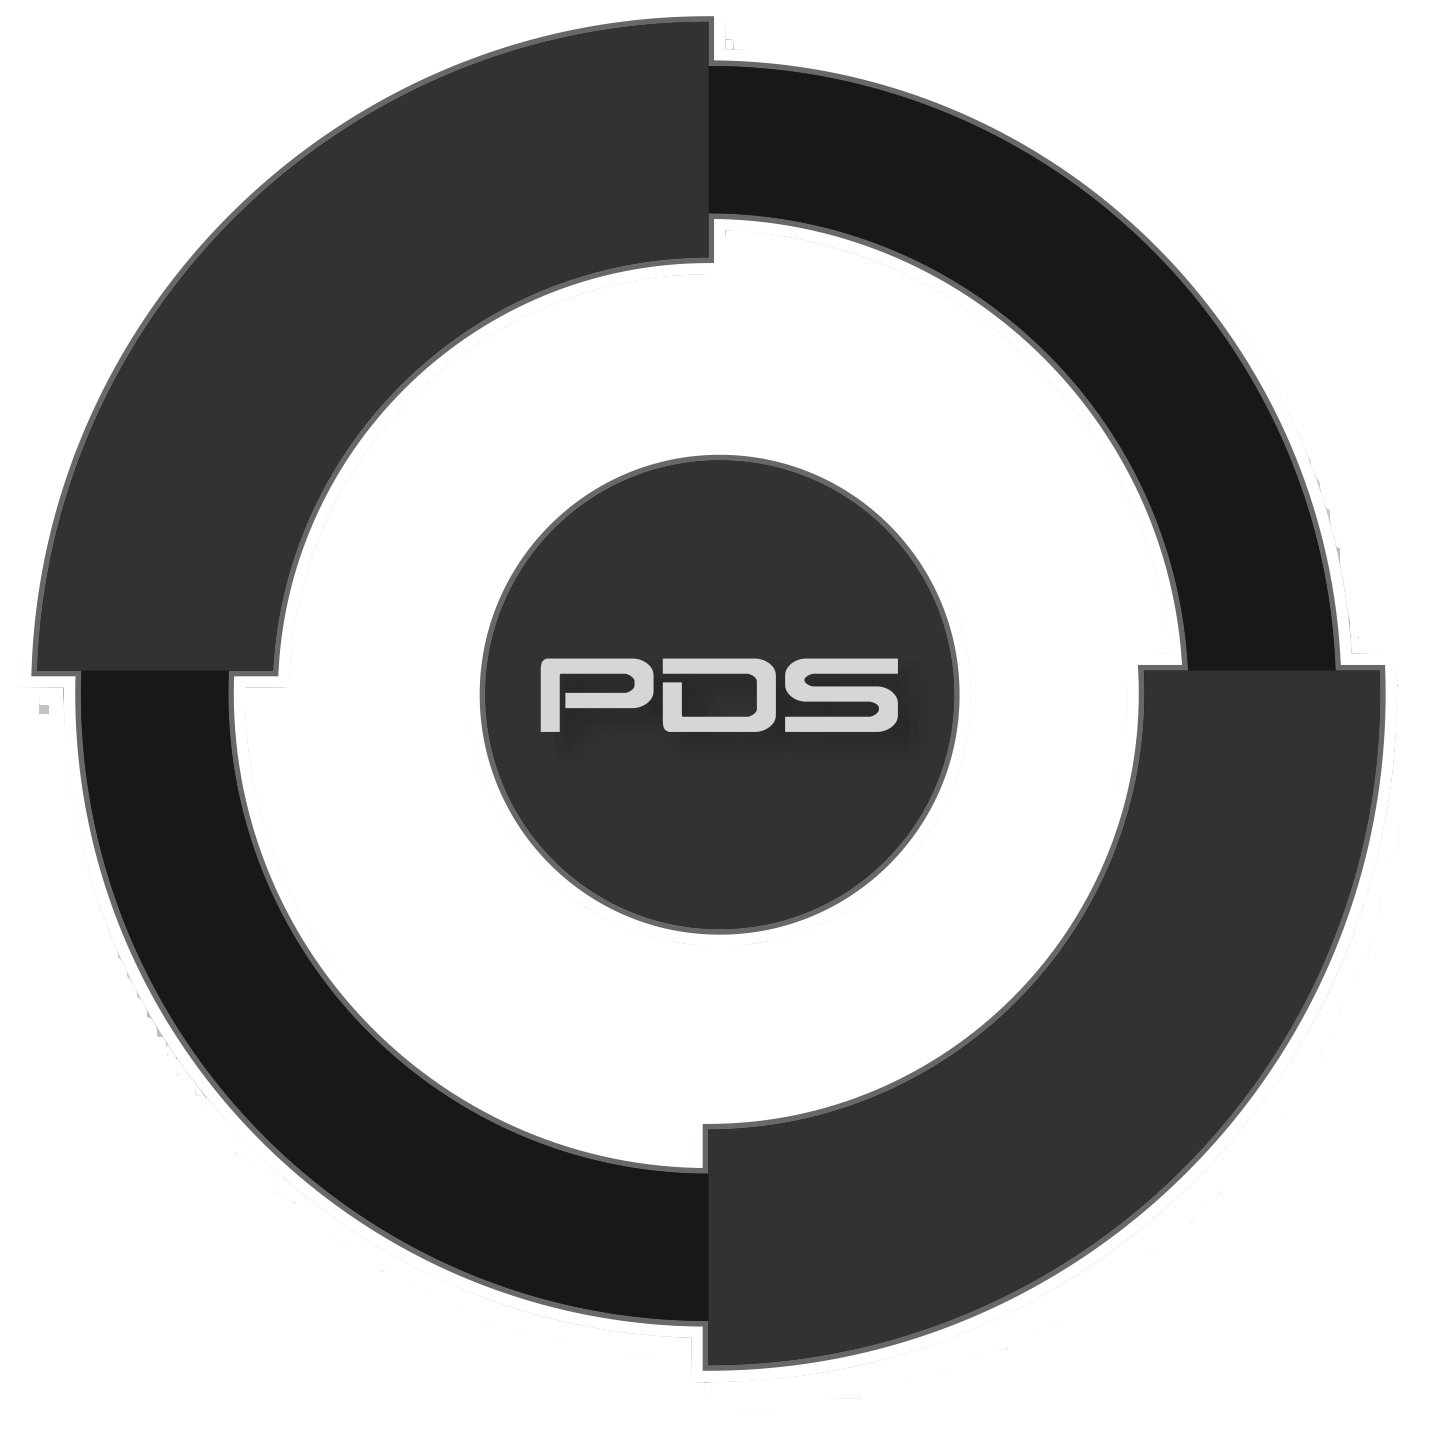 Player Development Systems - PDS